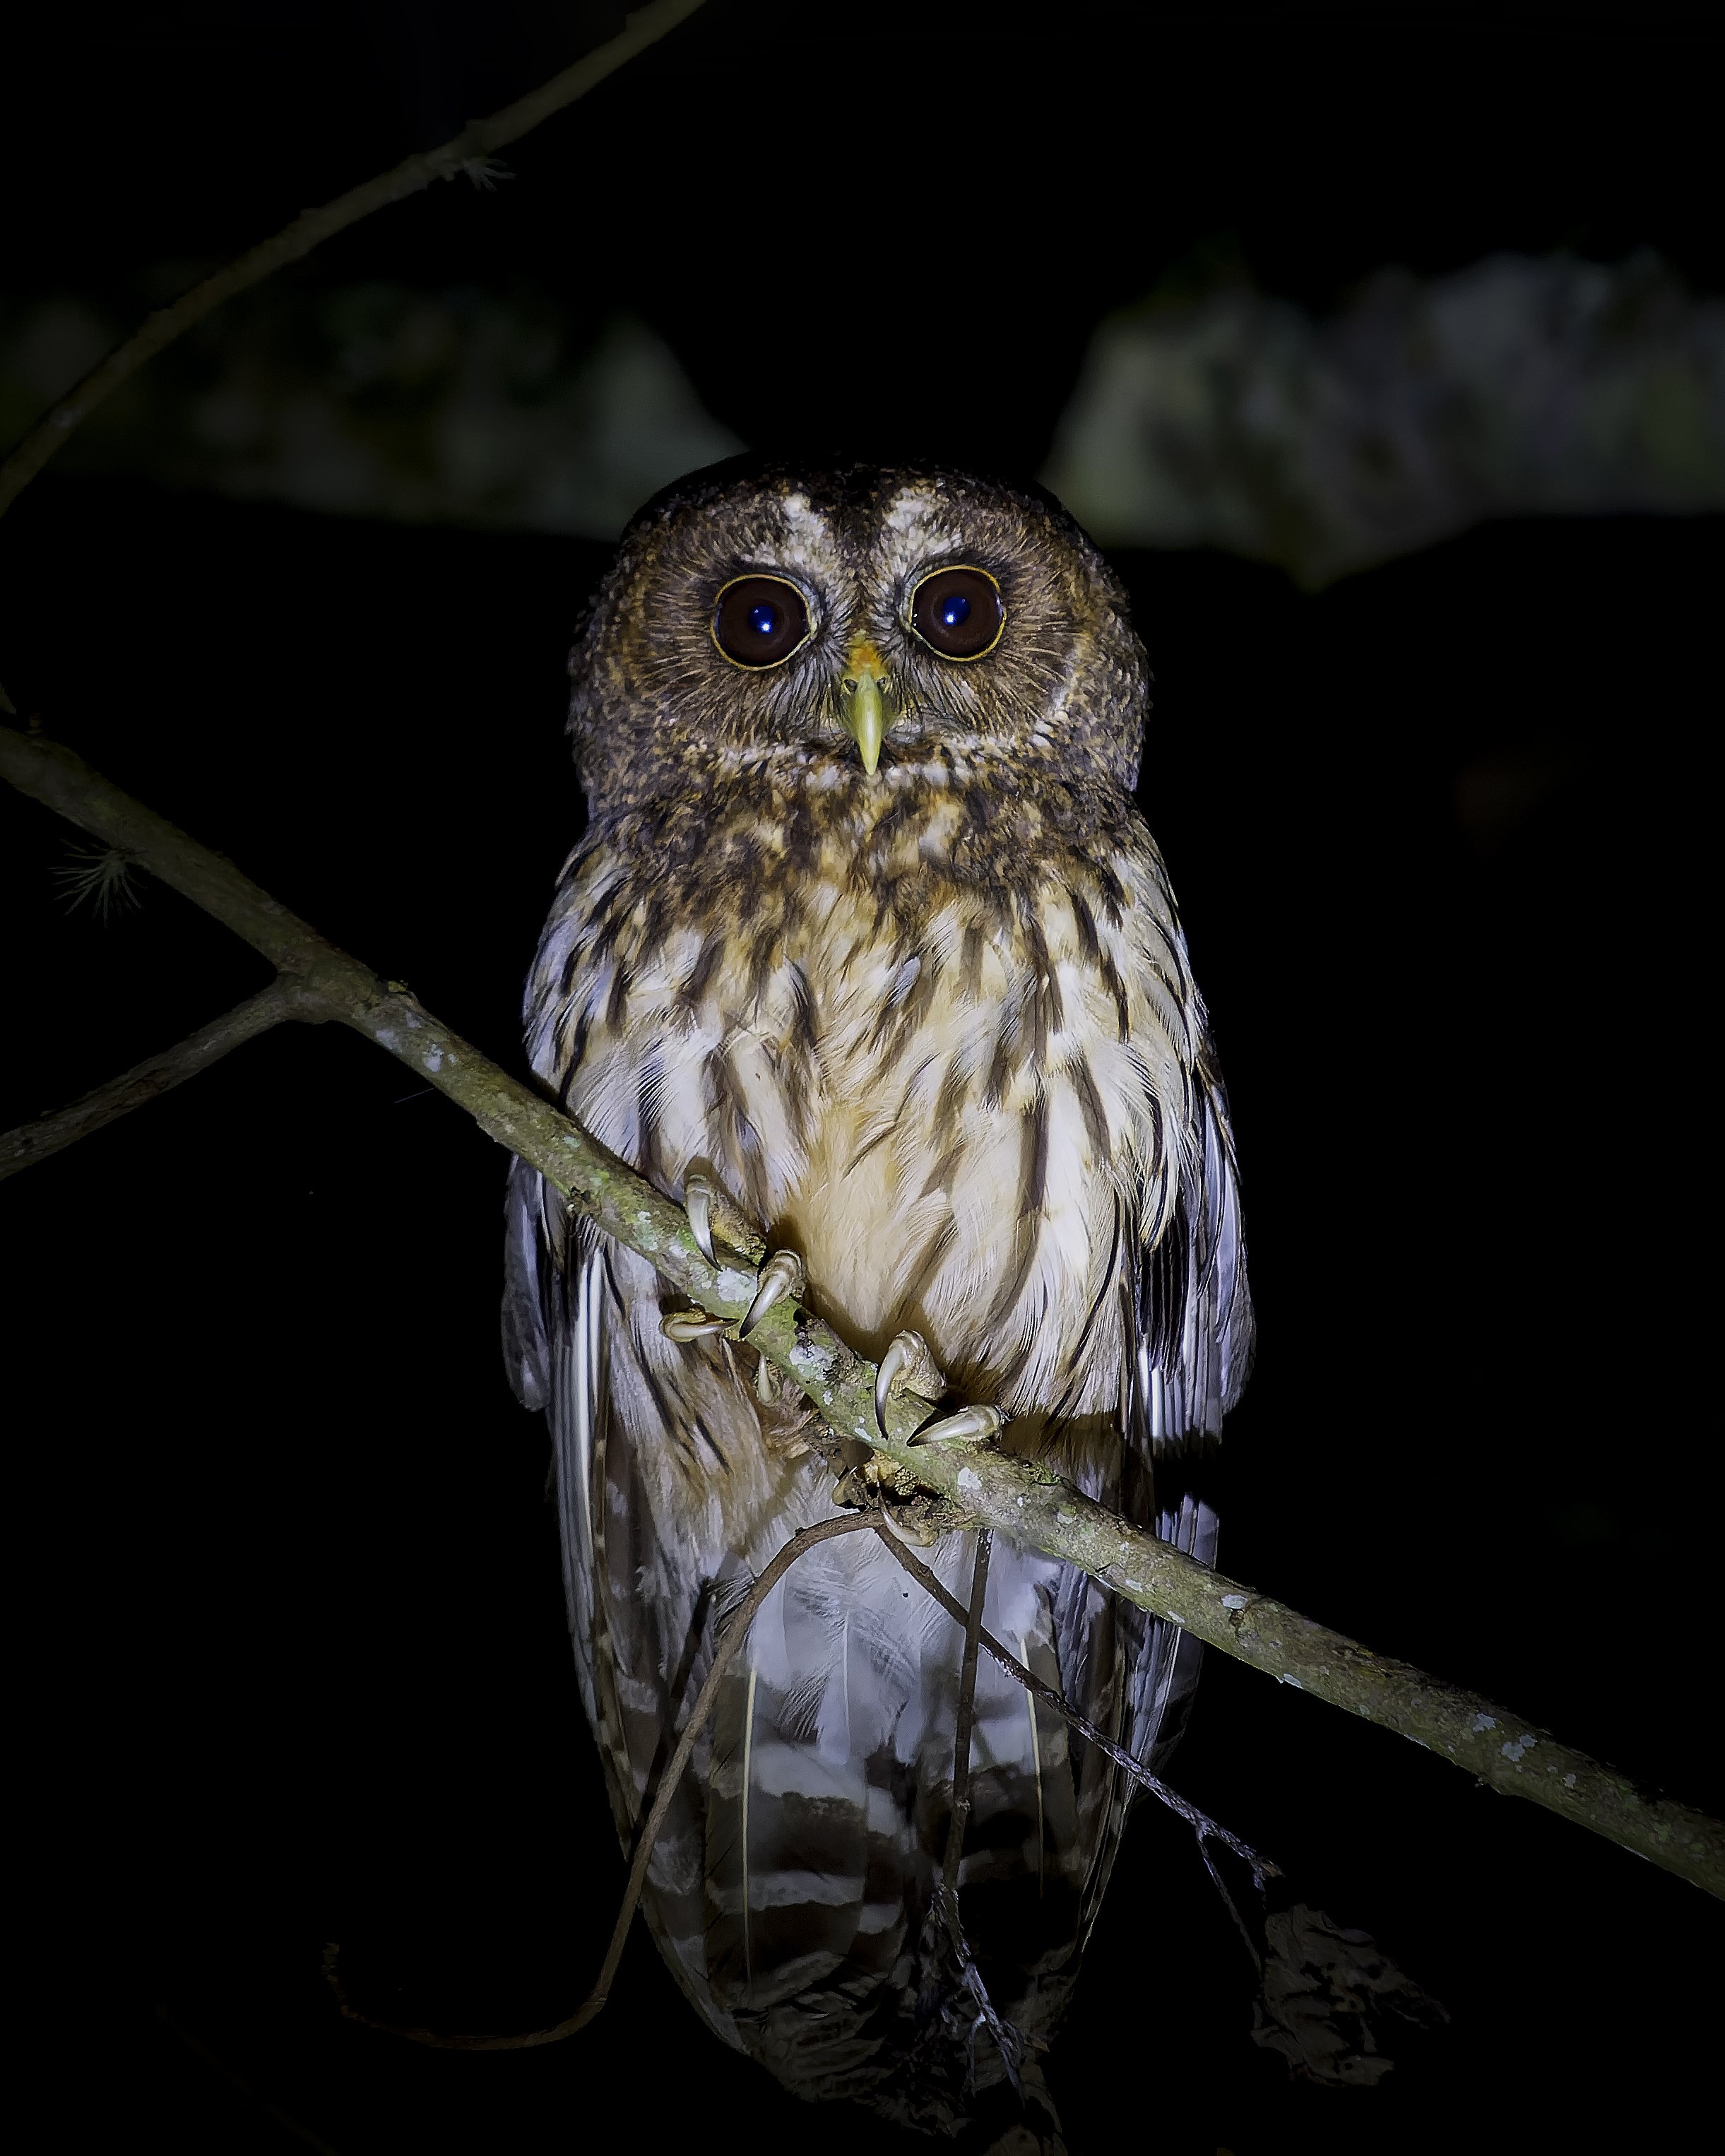 Front view of a Mottled Owl, which has amazing night vision that allows them to find prey in the dark. They play an important role in ecosystems by controlling animal populations. Miguel San Martín.